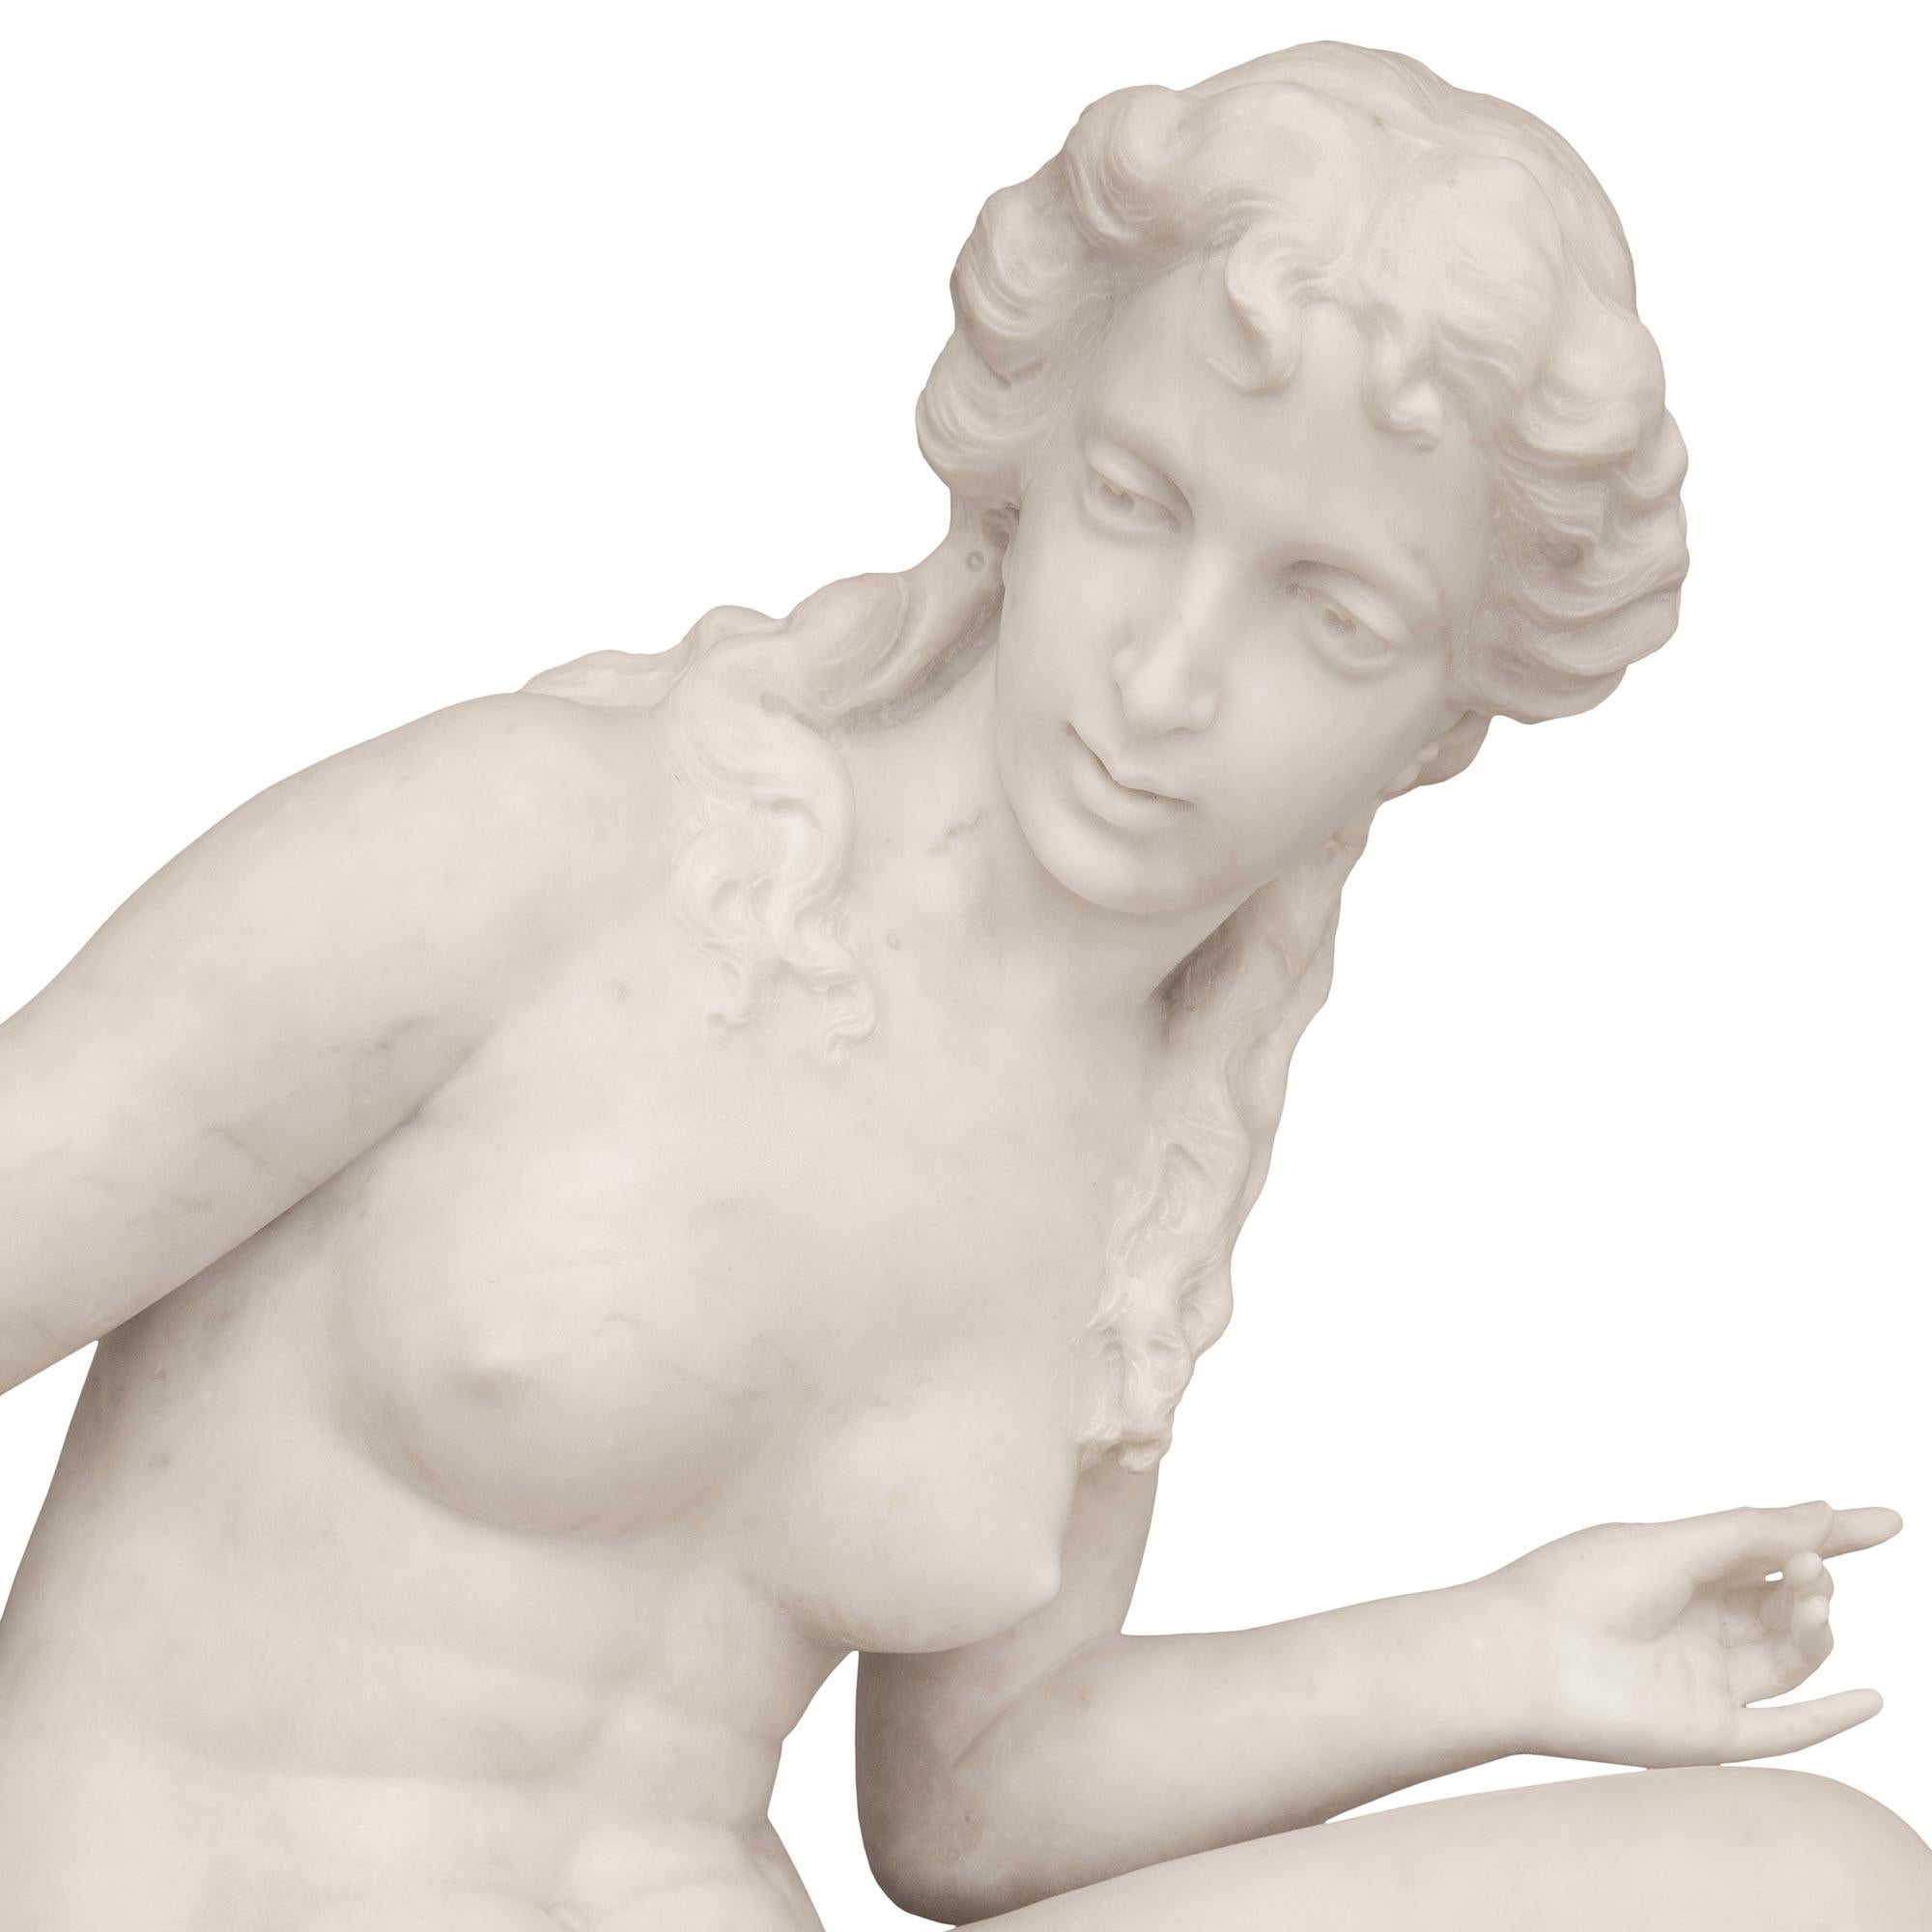 A charming and large scaled Italian 19th century white Carrara marble statue of a Venus and Cupid. The young Venus is seated on a rock with a flowing garment draped over her leg while gazing lovingly at the winged Cupid. She has one hand on her knee